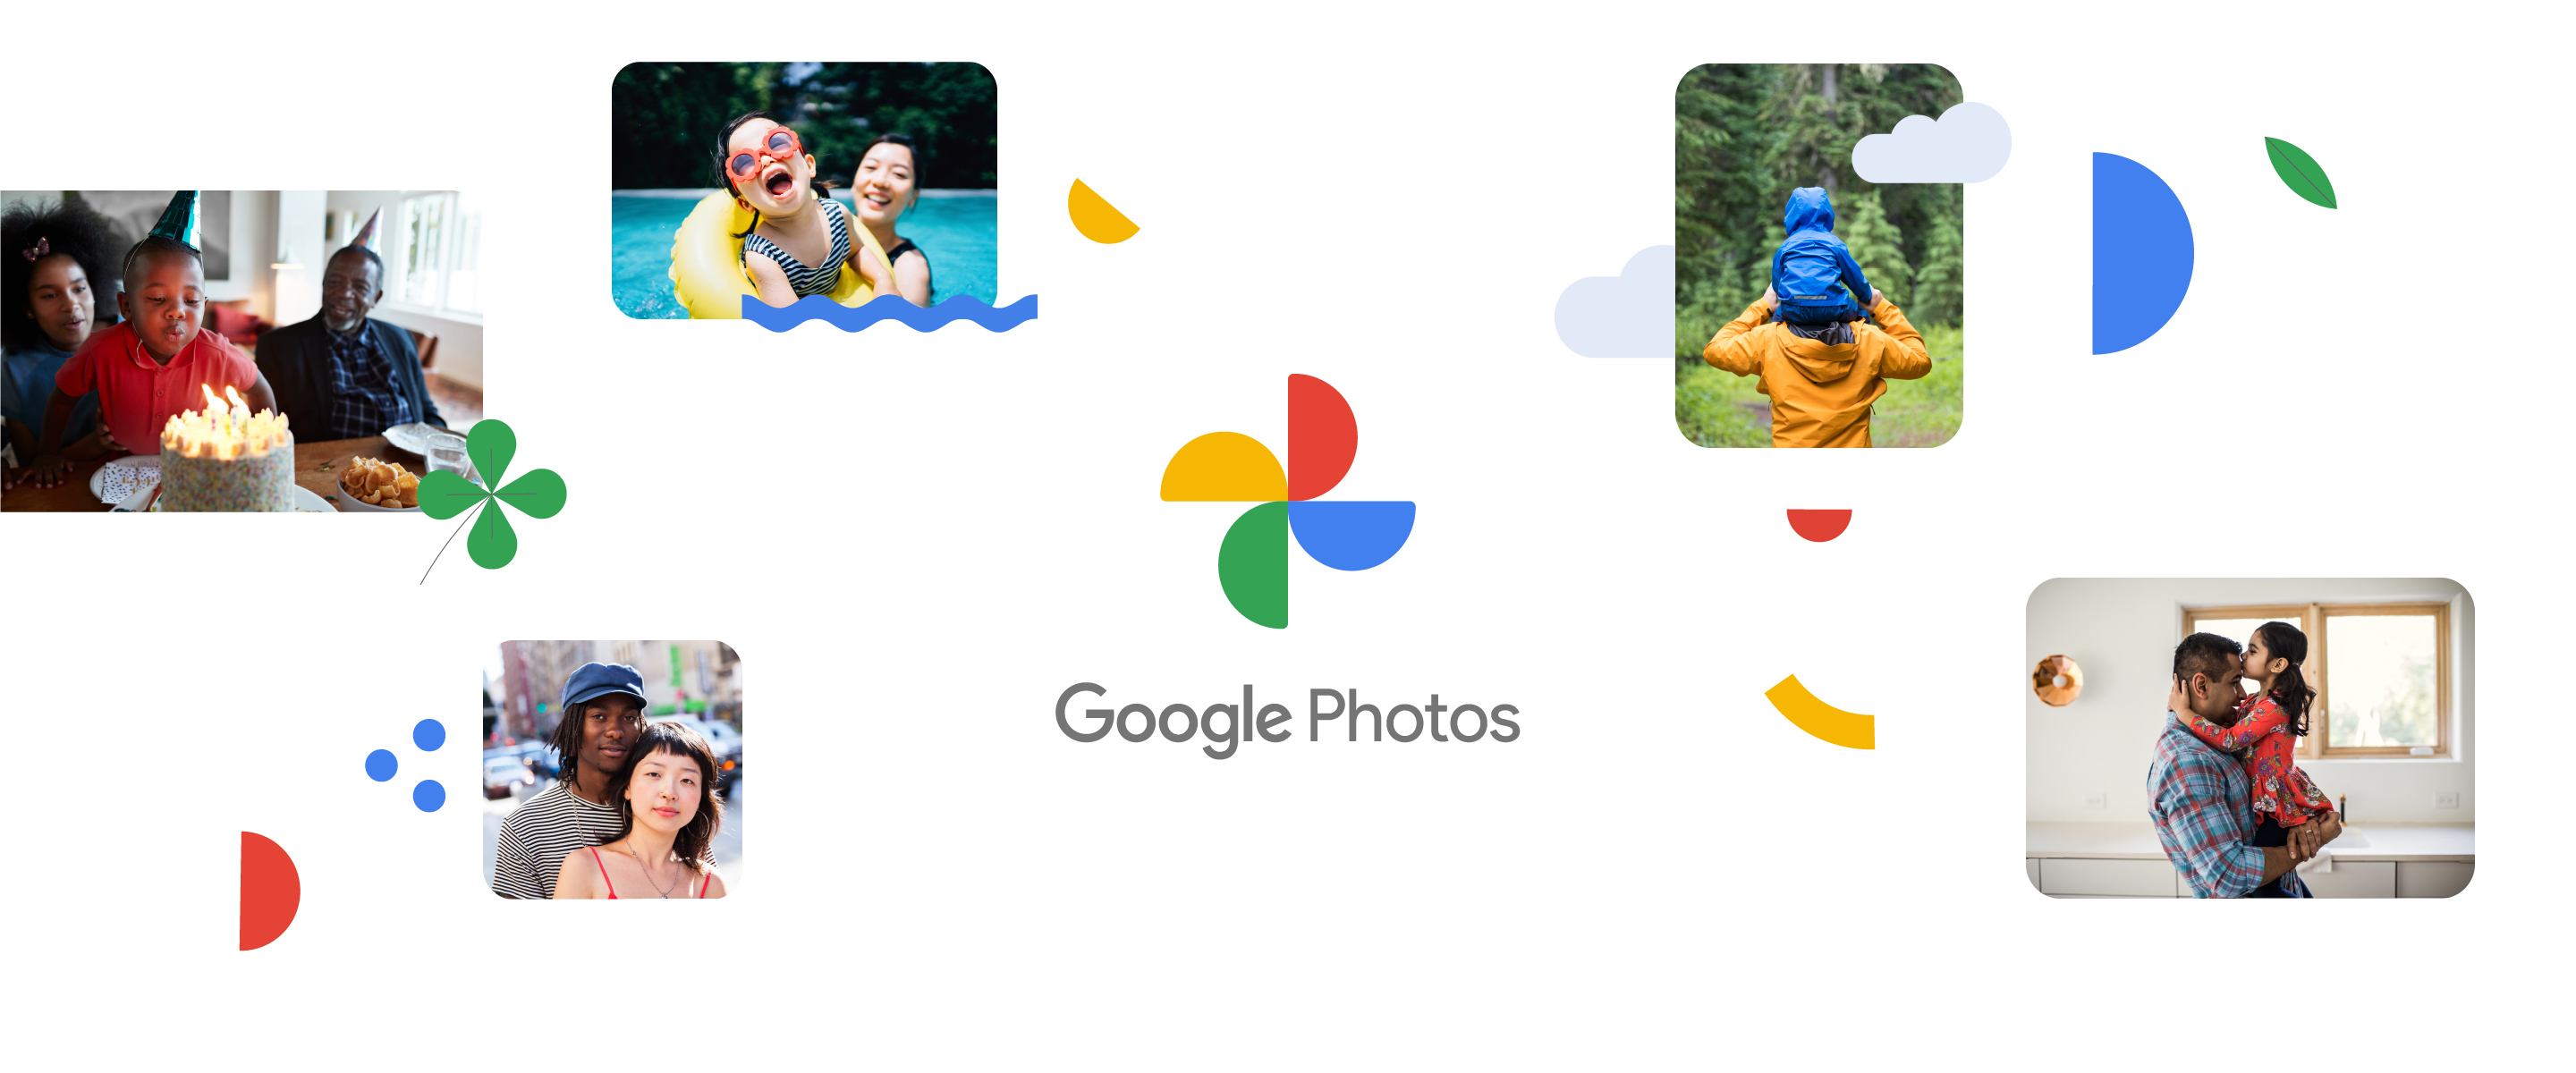 Cathedral spirit Petulance A redesigned Google Photos, built for your life's memories